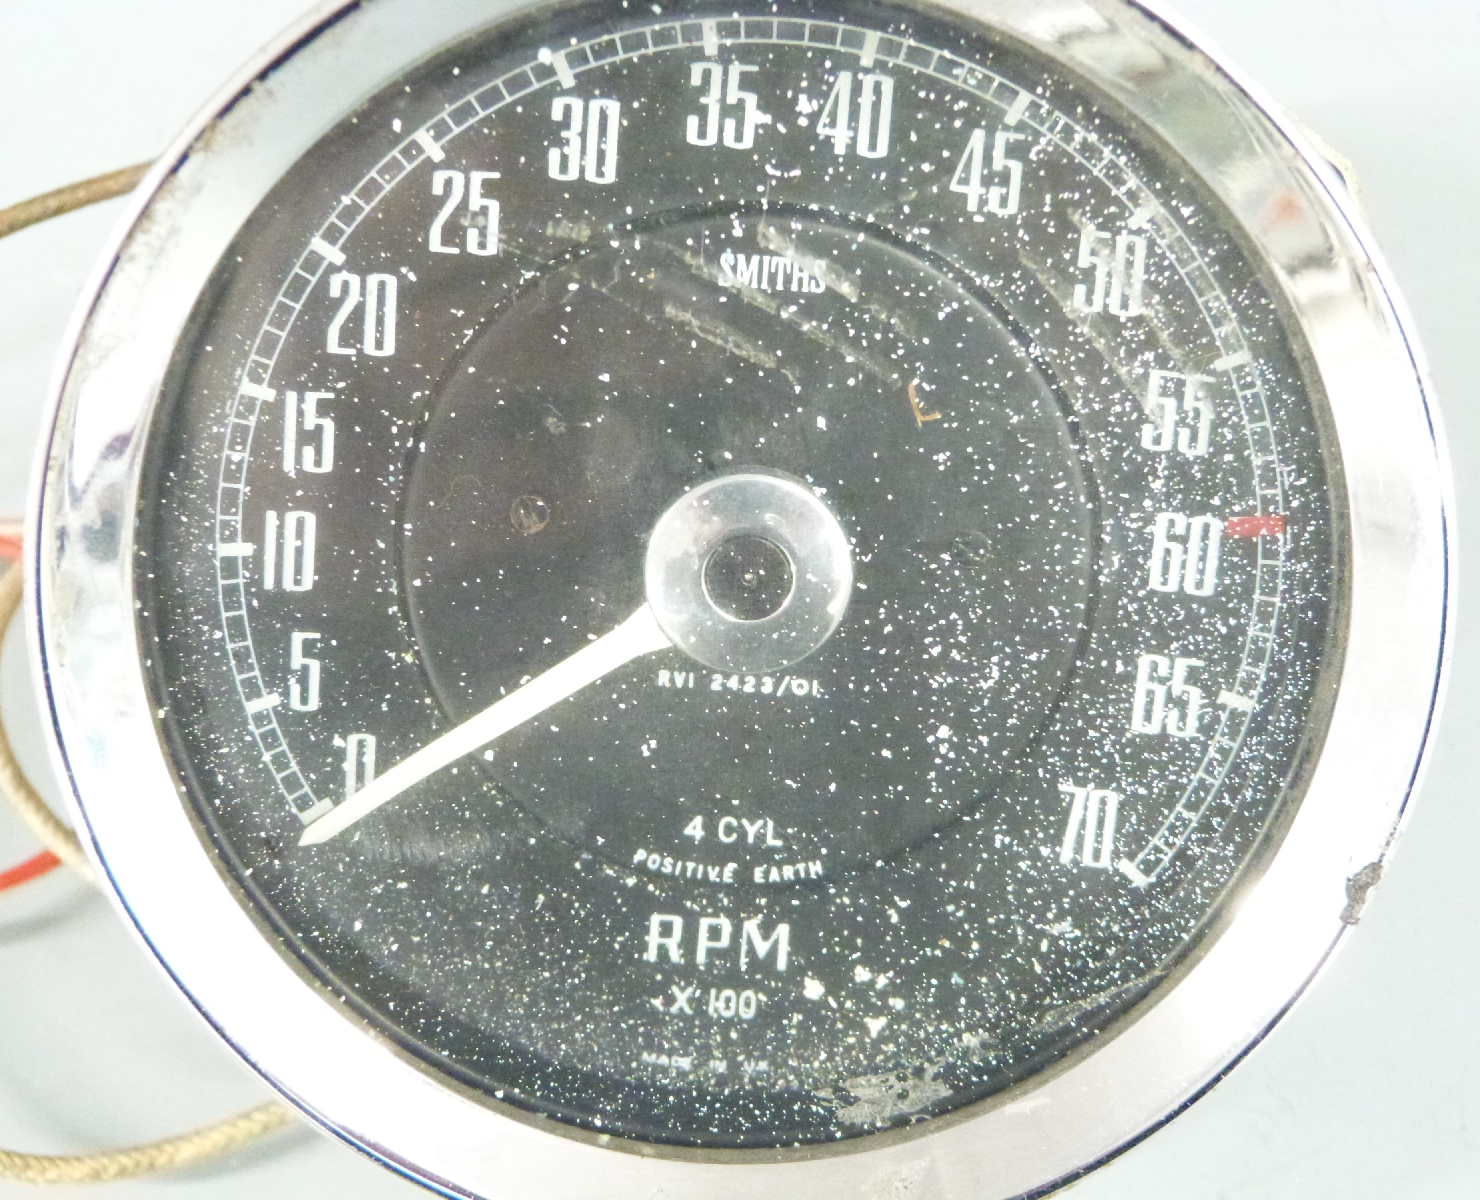 Smiths car rev counter marked to dial 4cyl and RVI 2423/01, red line at 6,000 rpm and reads up to - Image 2 of 3